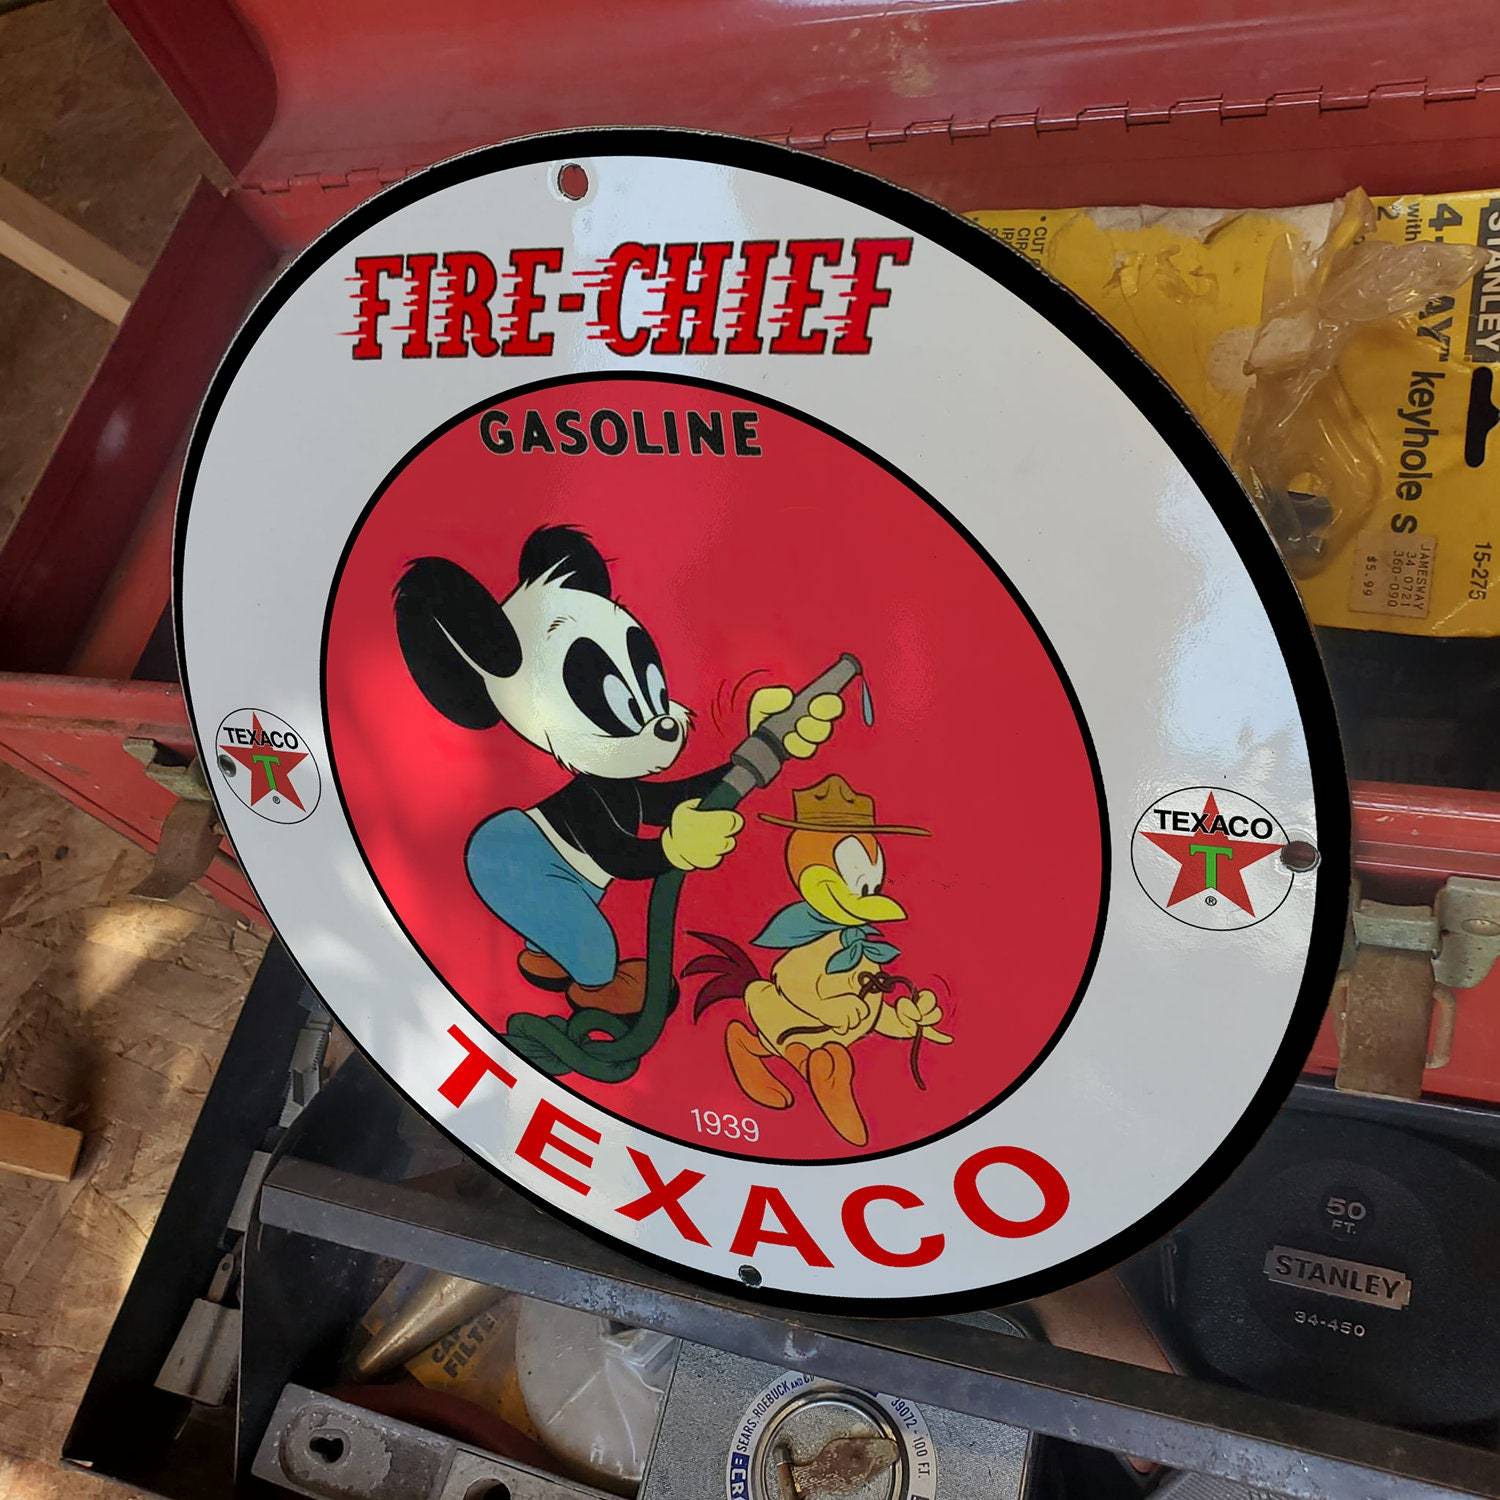 Vintage 1939 Texaco Fire Chief Gasoline ''Andy Panda'' Porcelain Gas & Oil Sign - $125.00